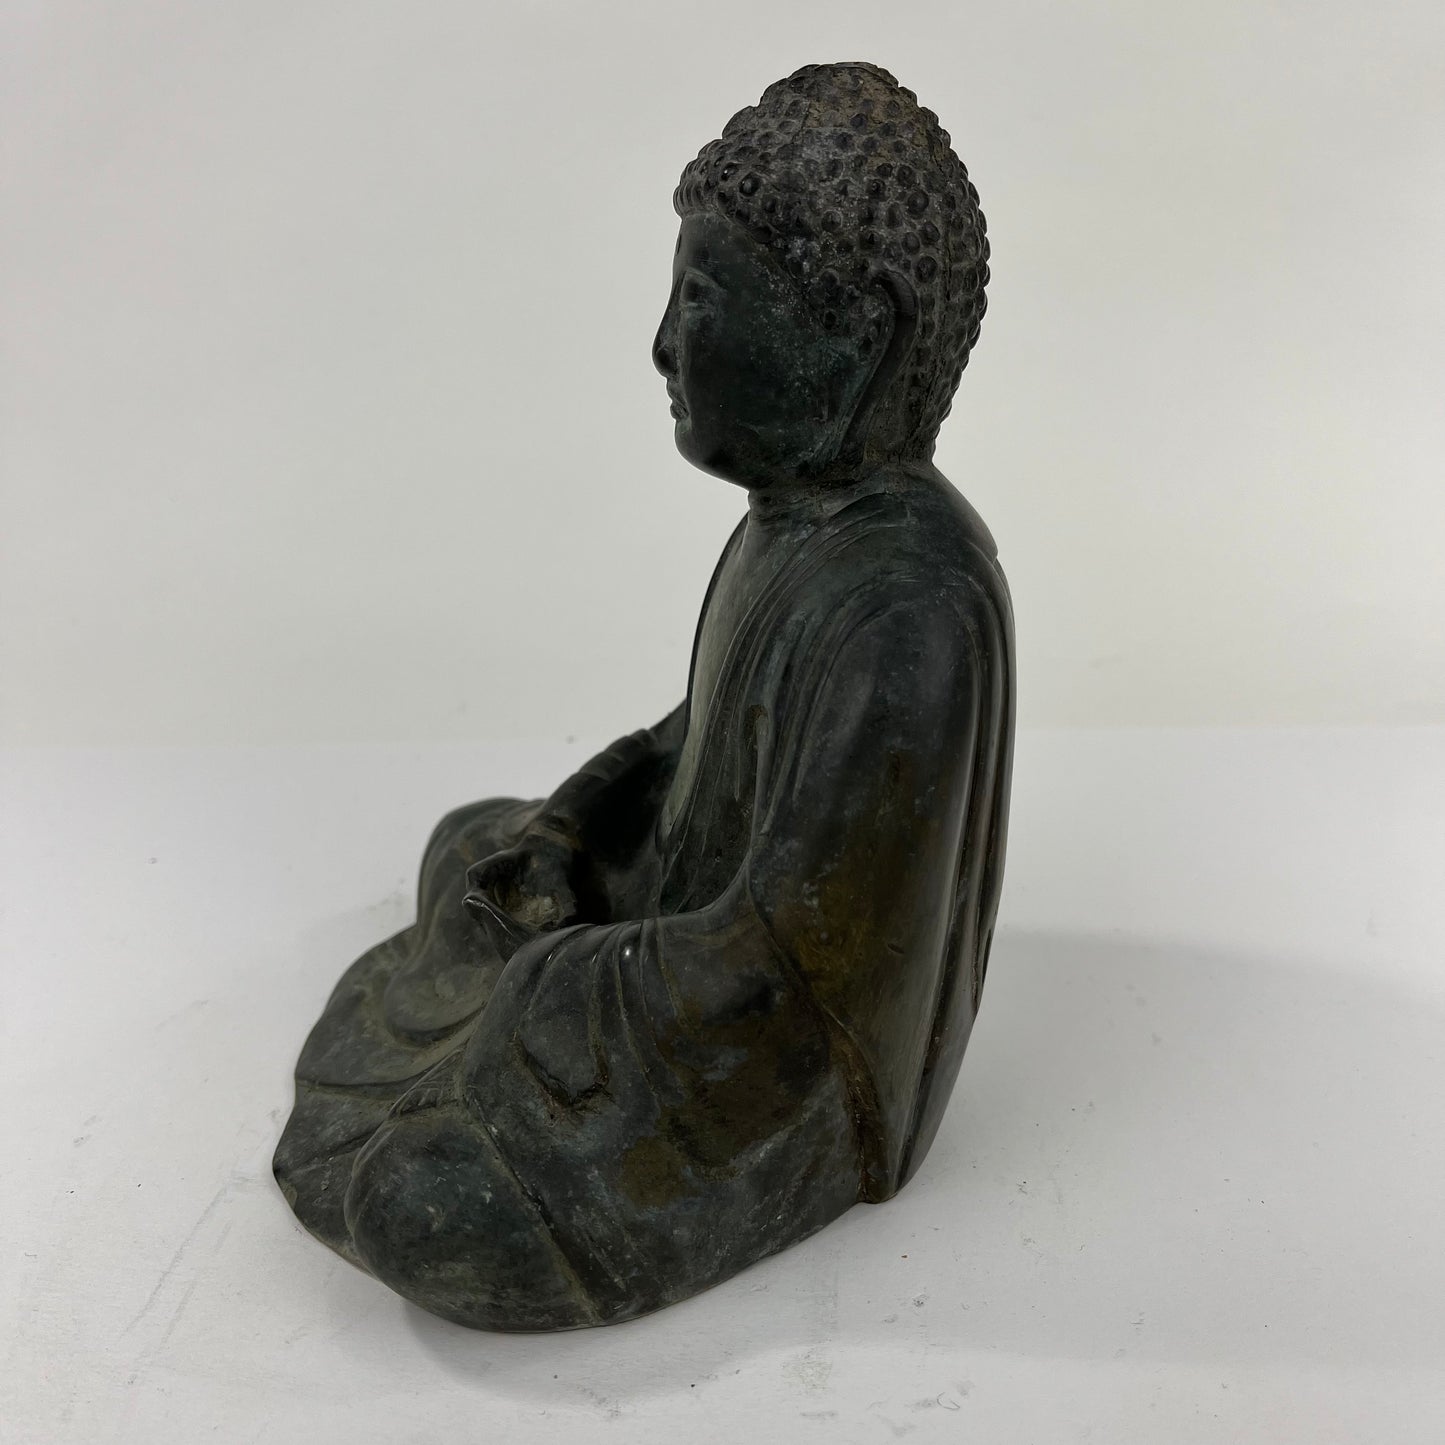 Vintage Japanese Bronze Statue of Buddha in Seated Meditation 6.5"H